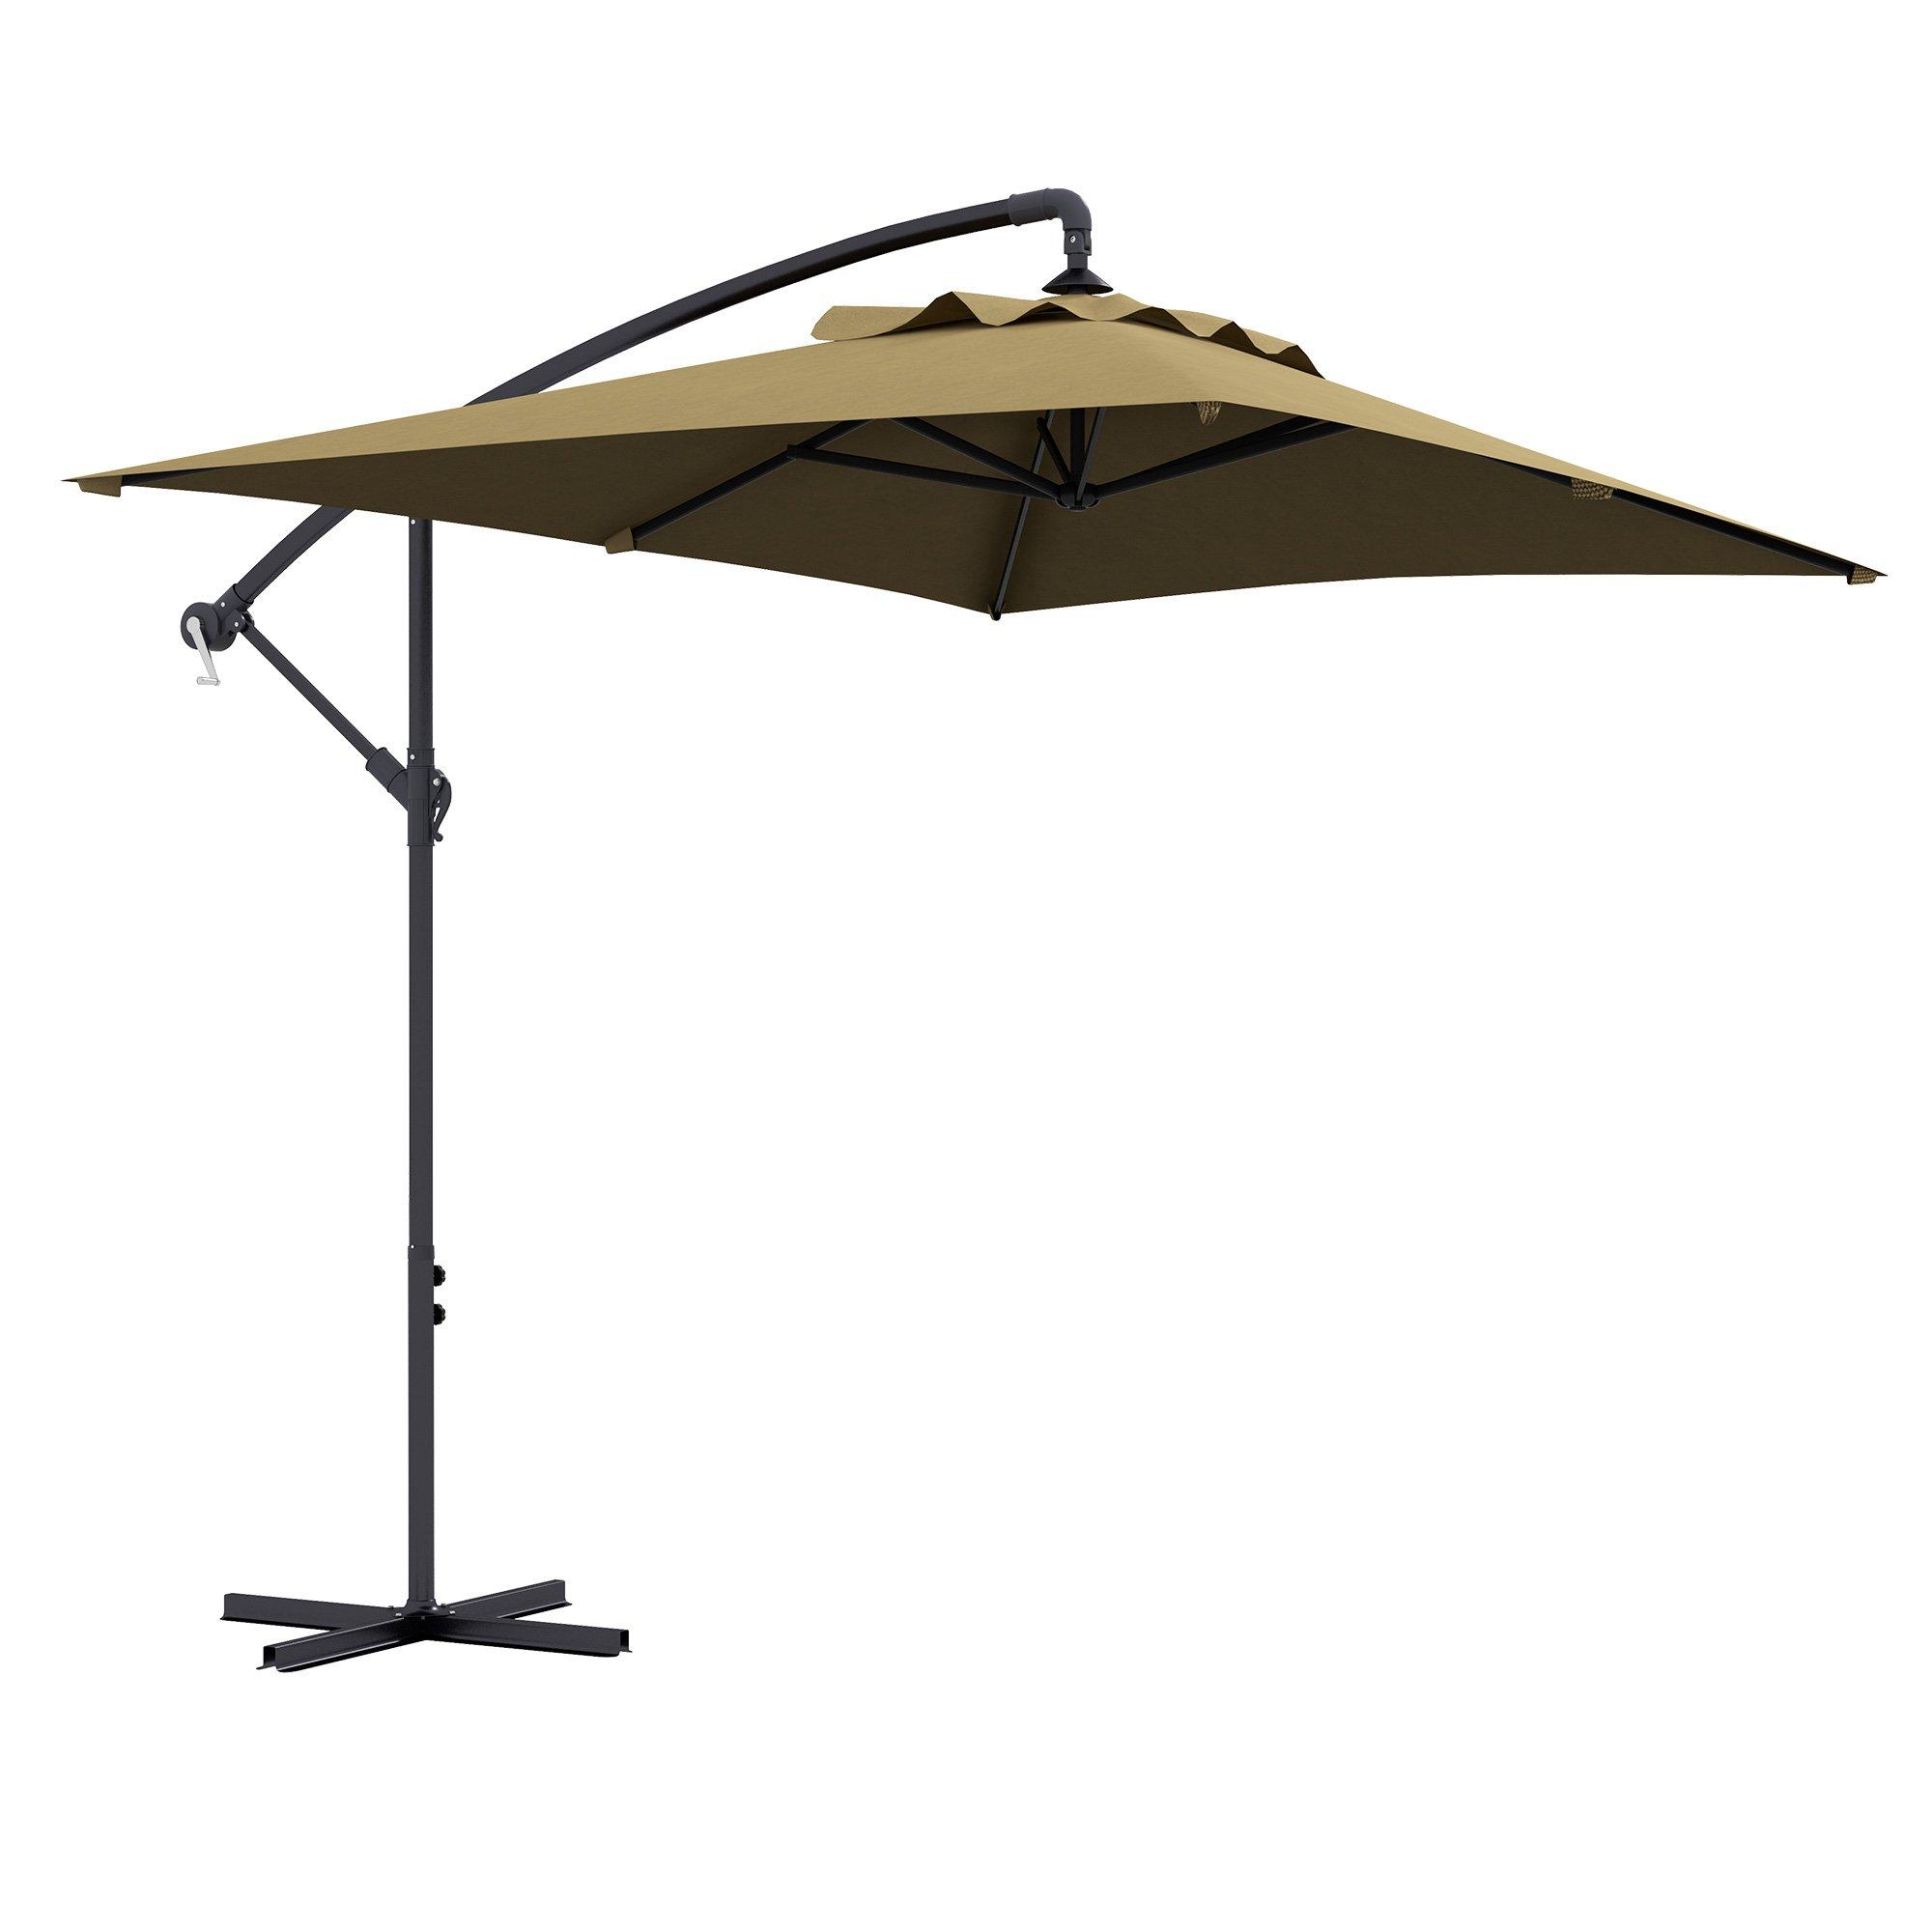 3 m Cantilever Parasol with Cross Base, Crank Handle, 6 Ribs